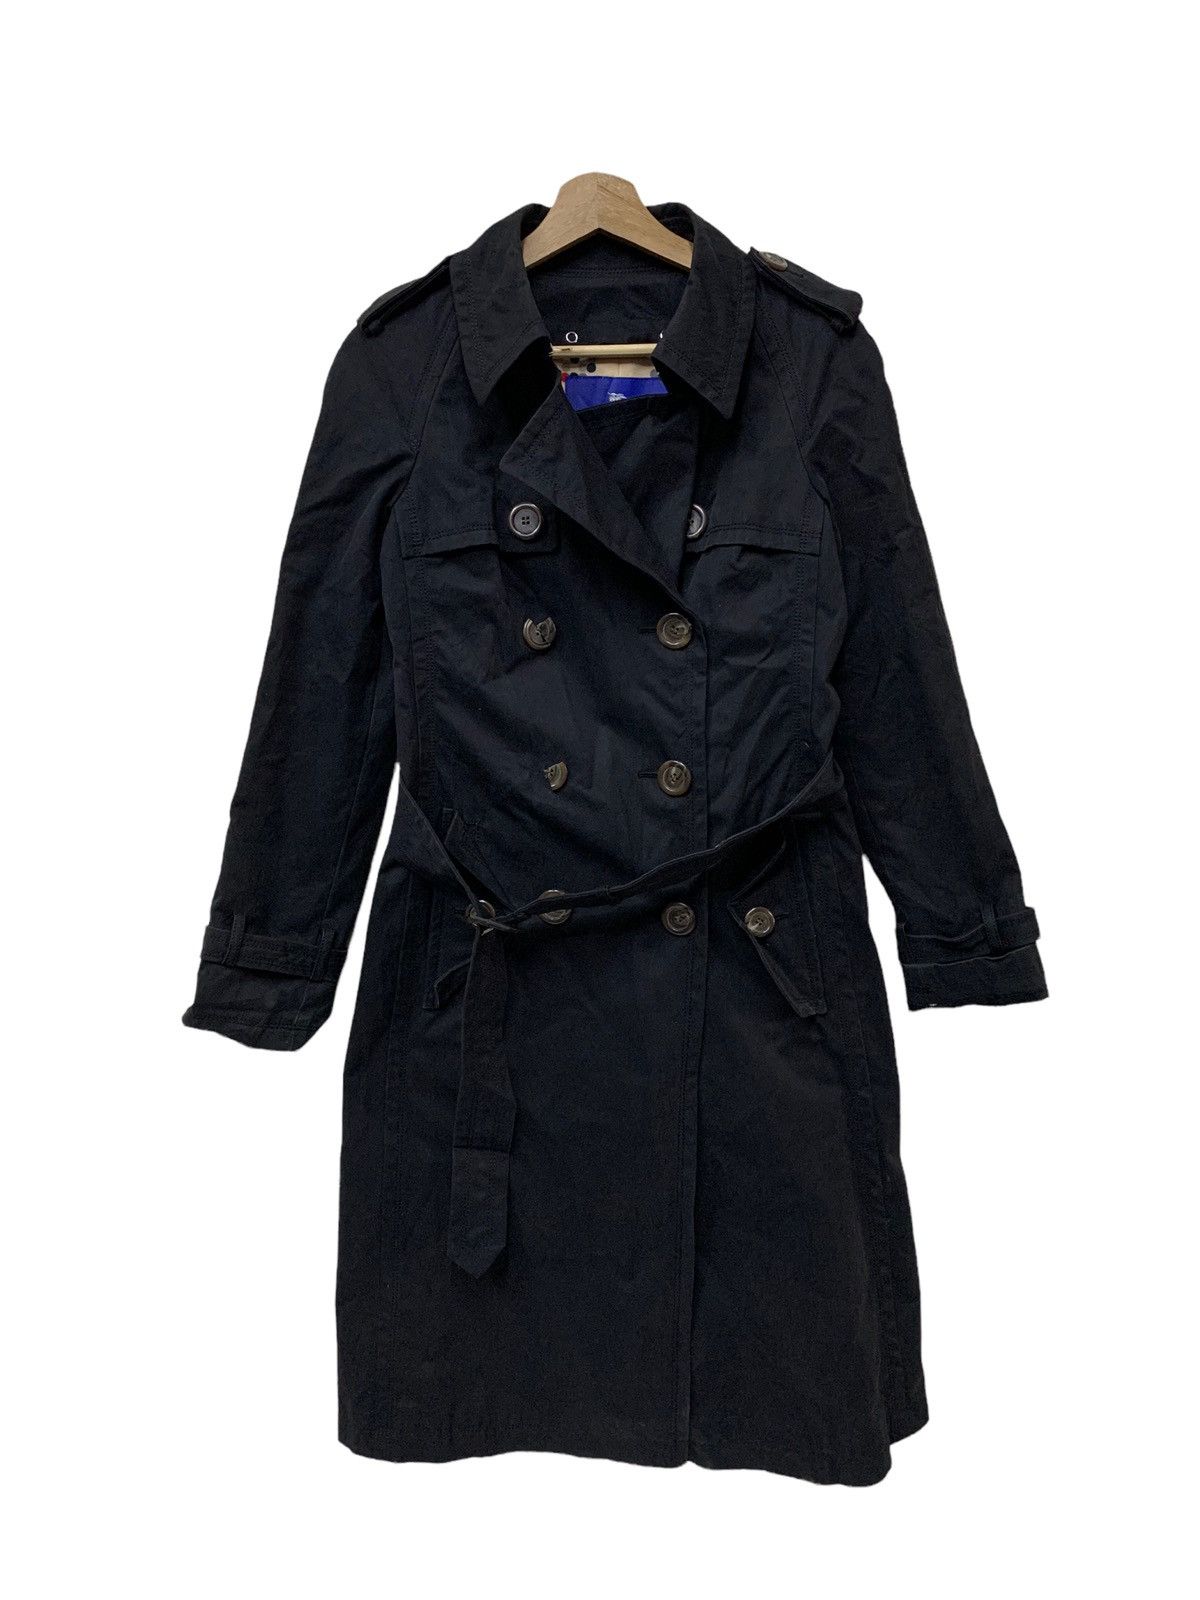 🔥BURBERRY BLUE LABEL WOOL CHERRY LINED TRENCH COAT - 5